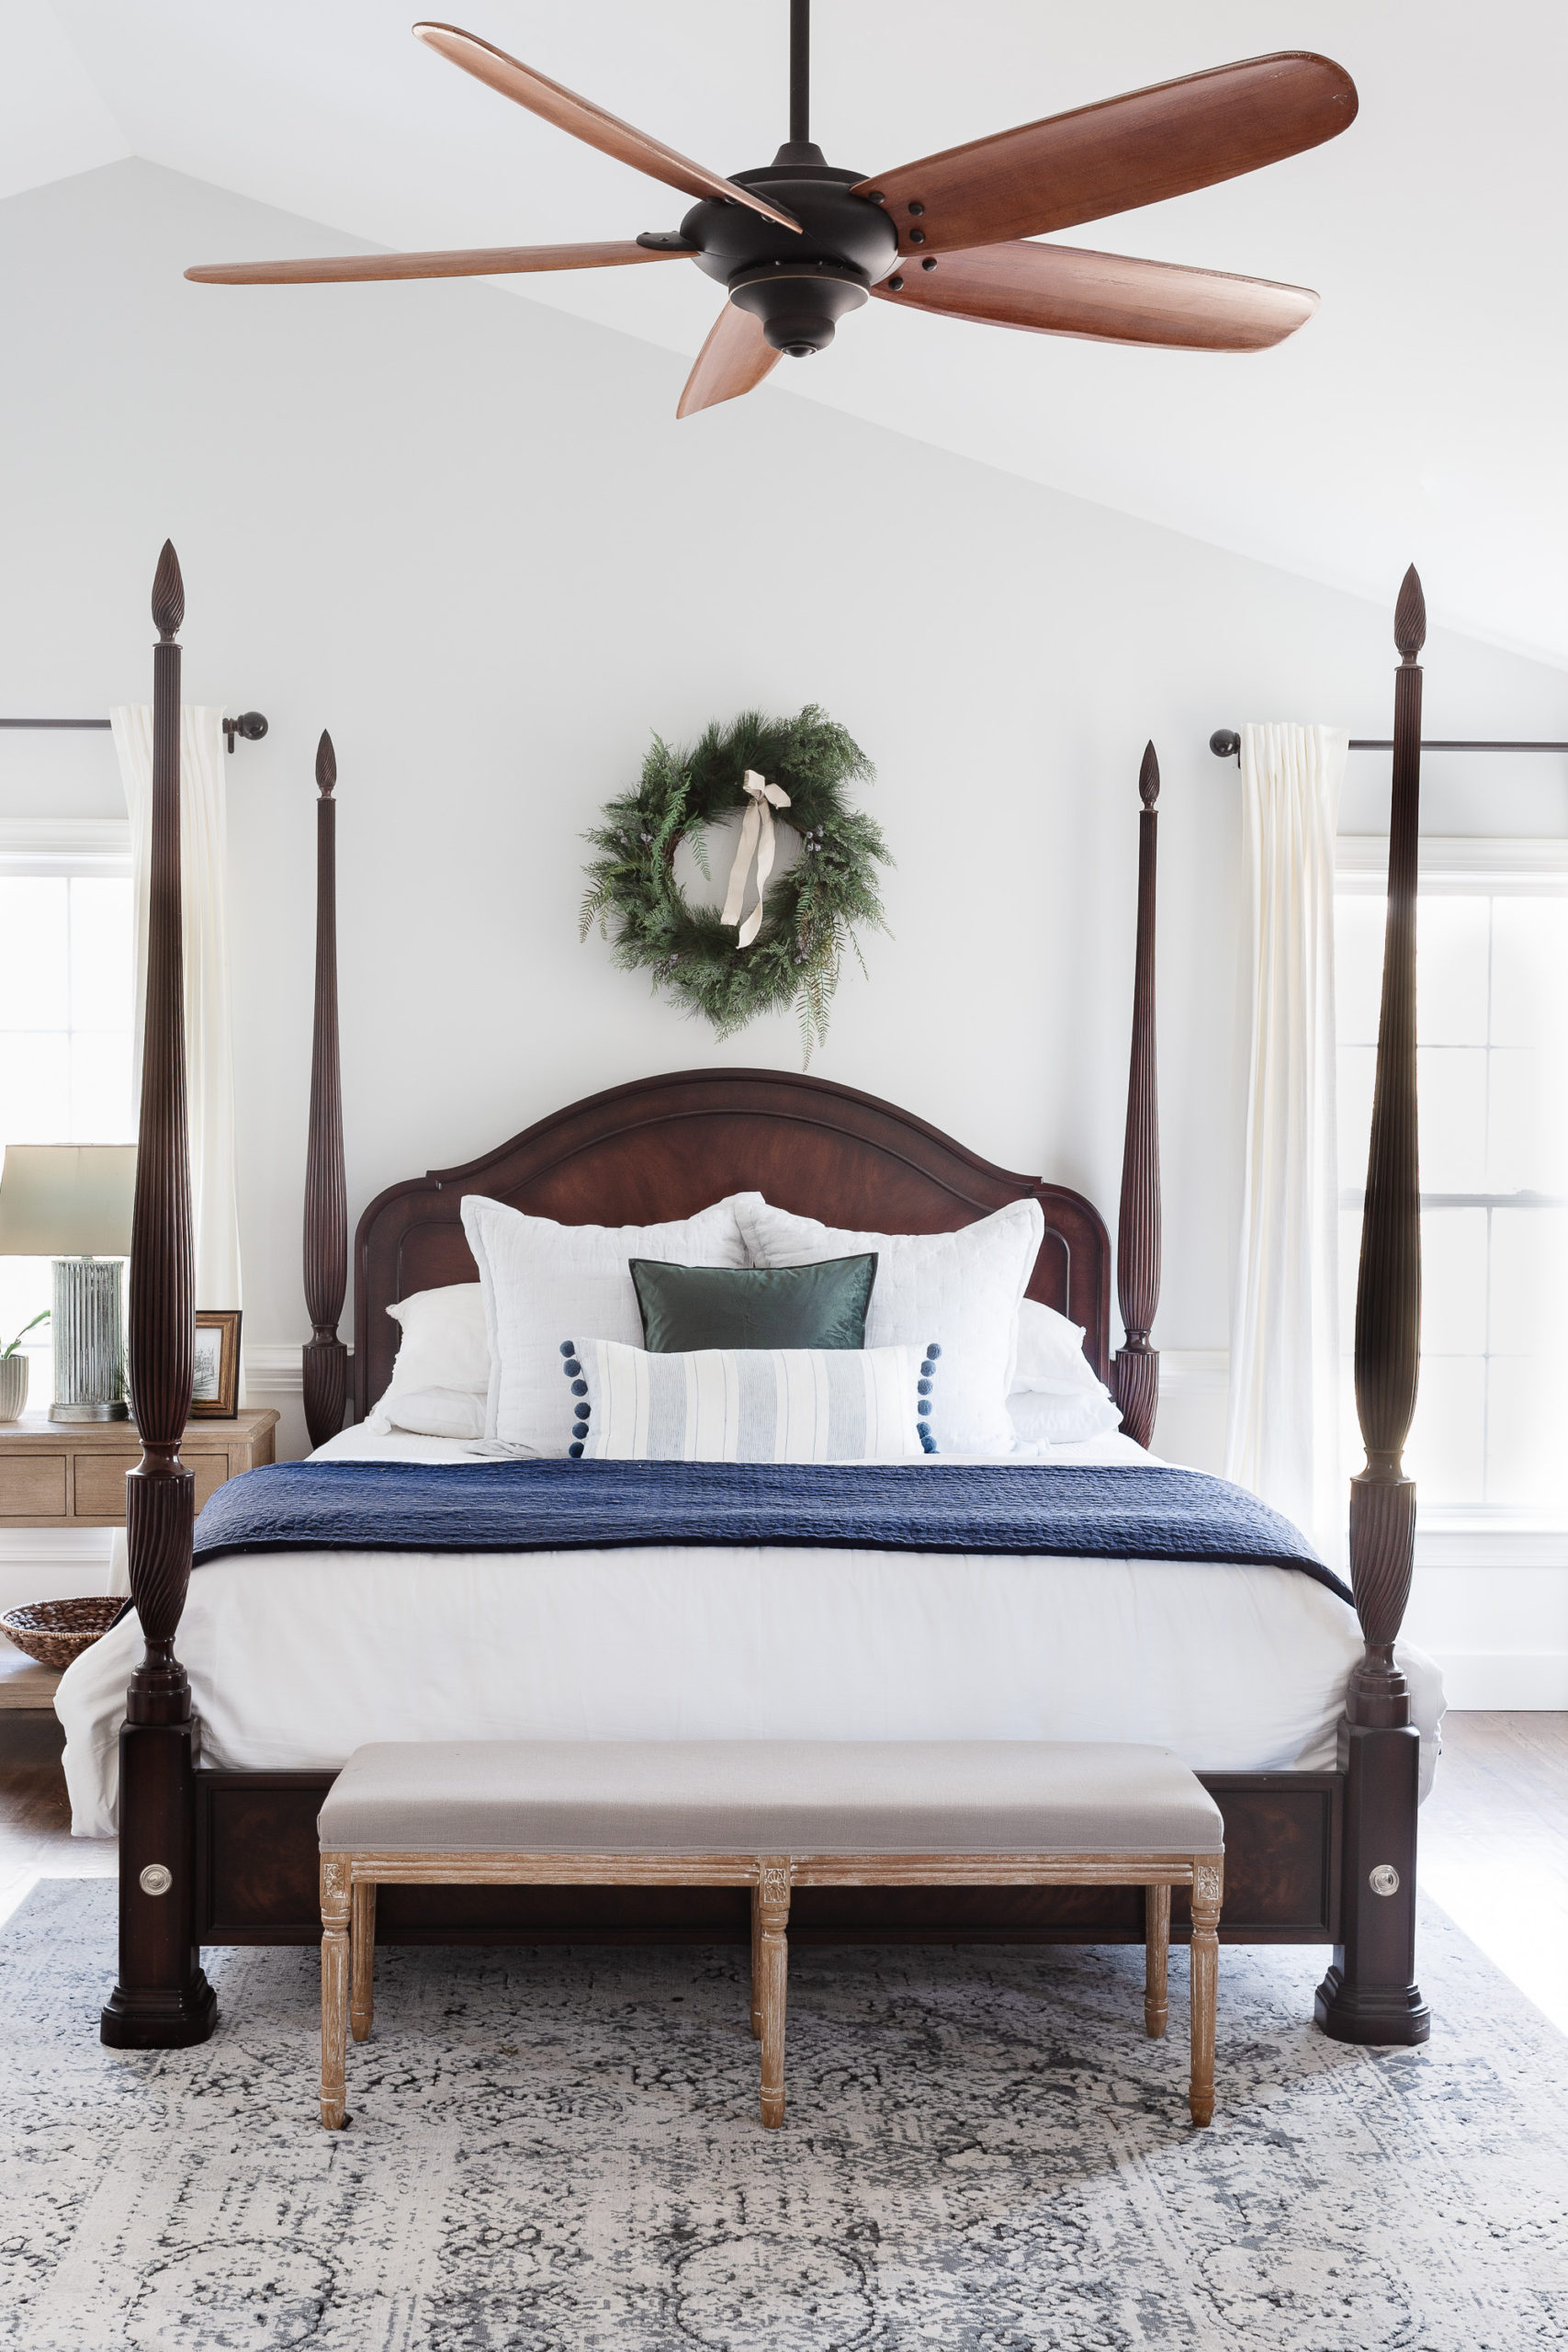 Christmas wreath above bed in bedroom